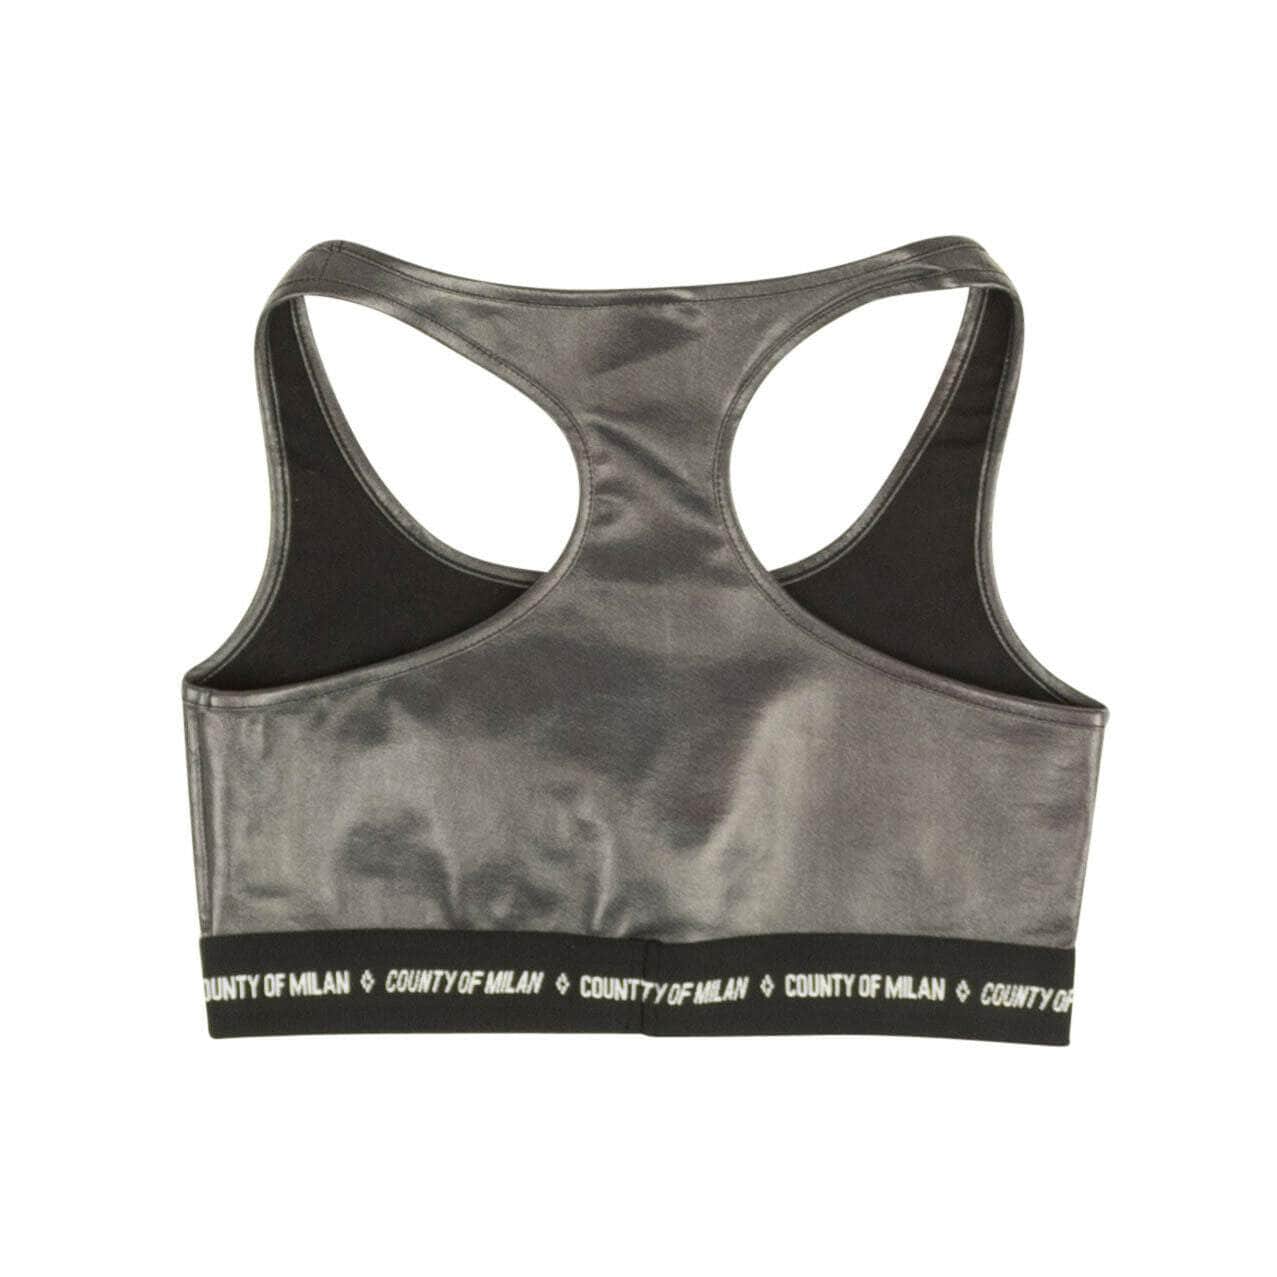 Marcelo Burlon channelenable-all, chicmi, couponcollection, gender-womens, main-clothing, marcelo-burlon, size-s, uncategorized, under-250 S Black Shiny Logo Band Sports Bra 82NGG-MB-1197/S 82NGG-MB-1197/S